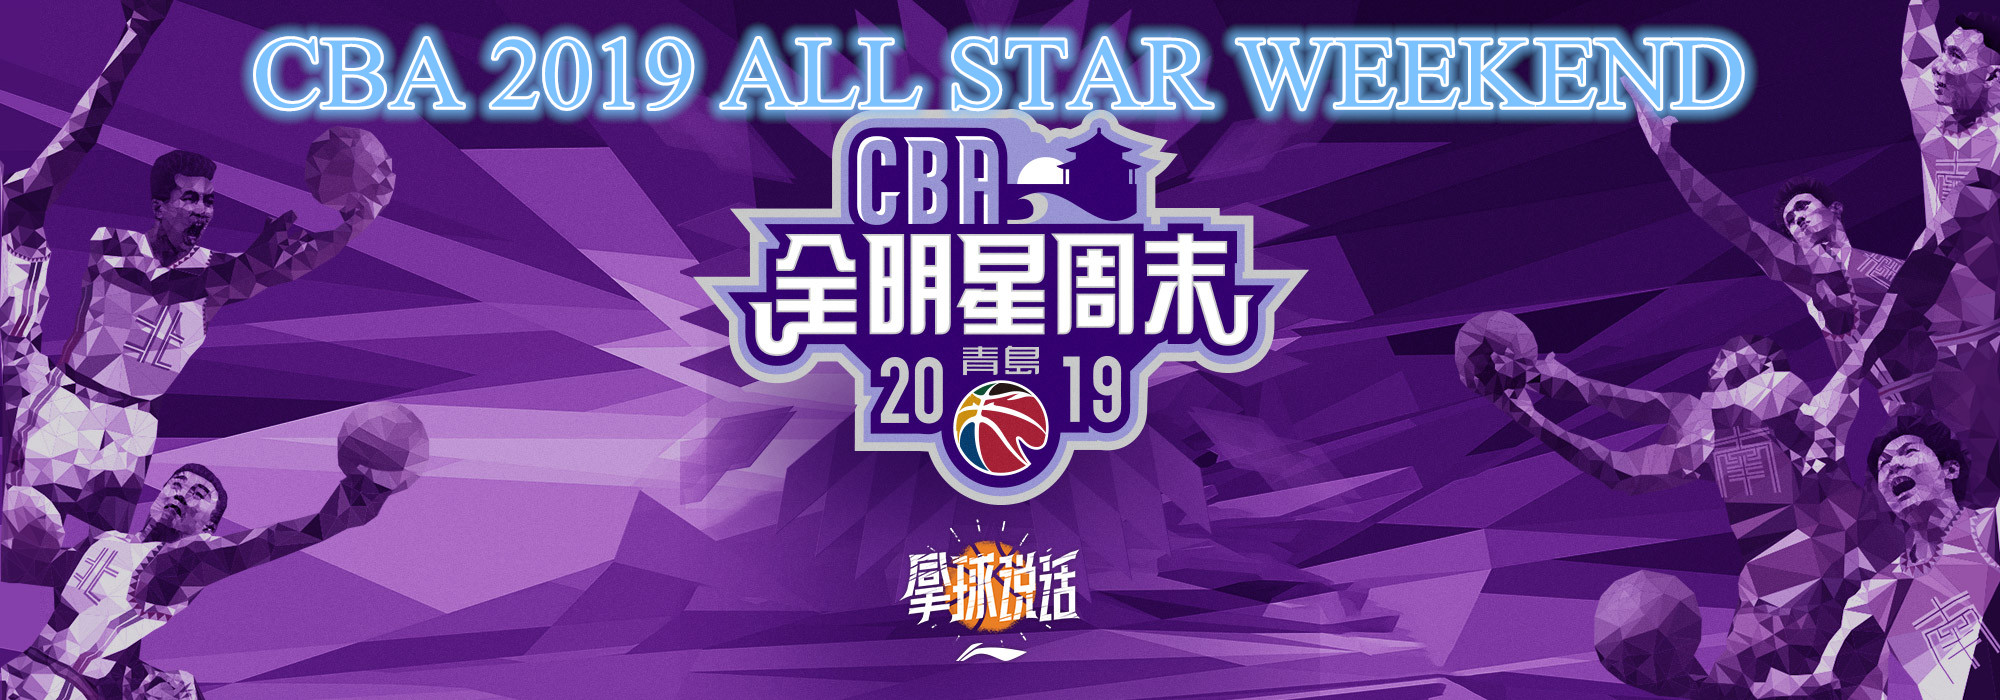 2019 CBA ALL STAR WEEKEND